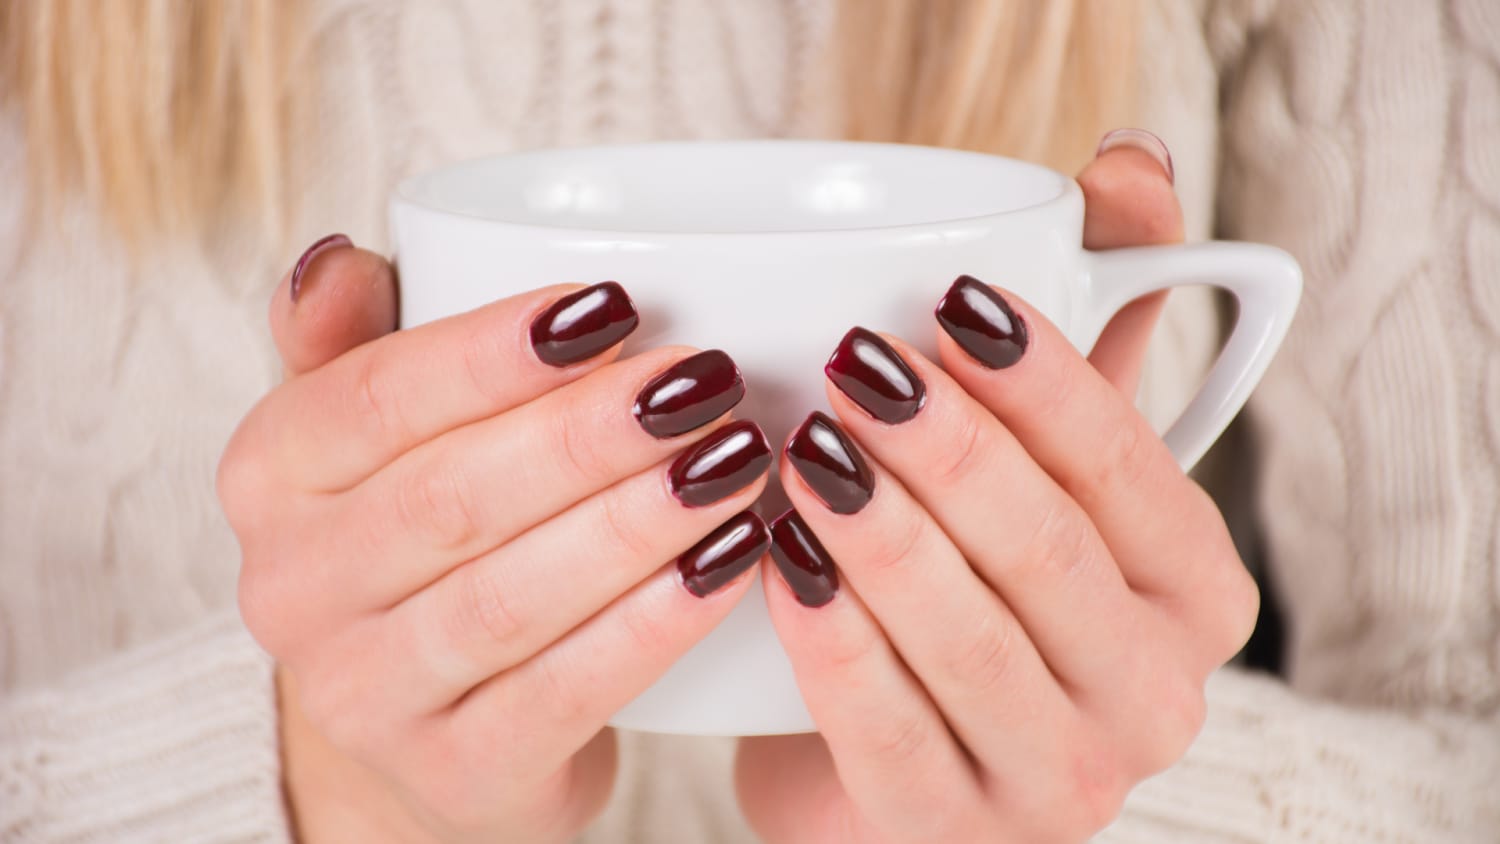 How to Take Care of Nails at Home? 3 Tips